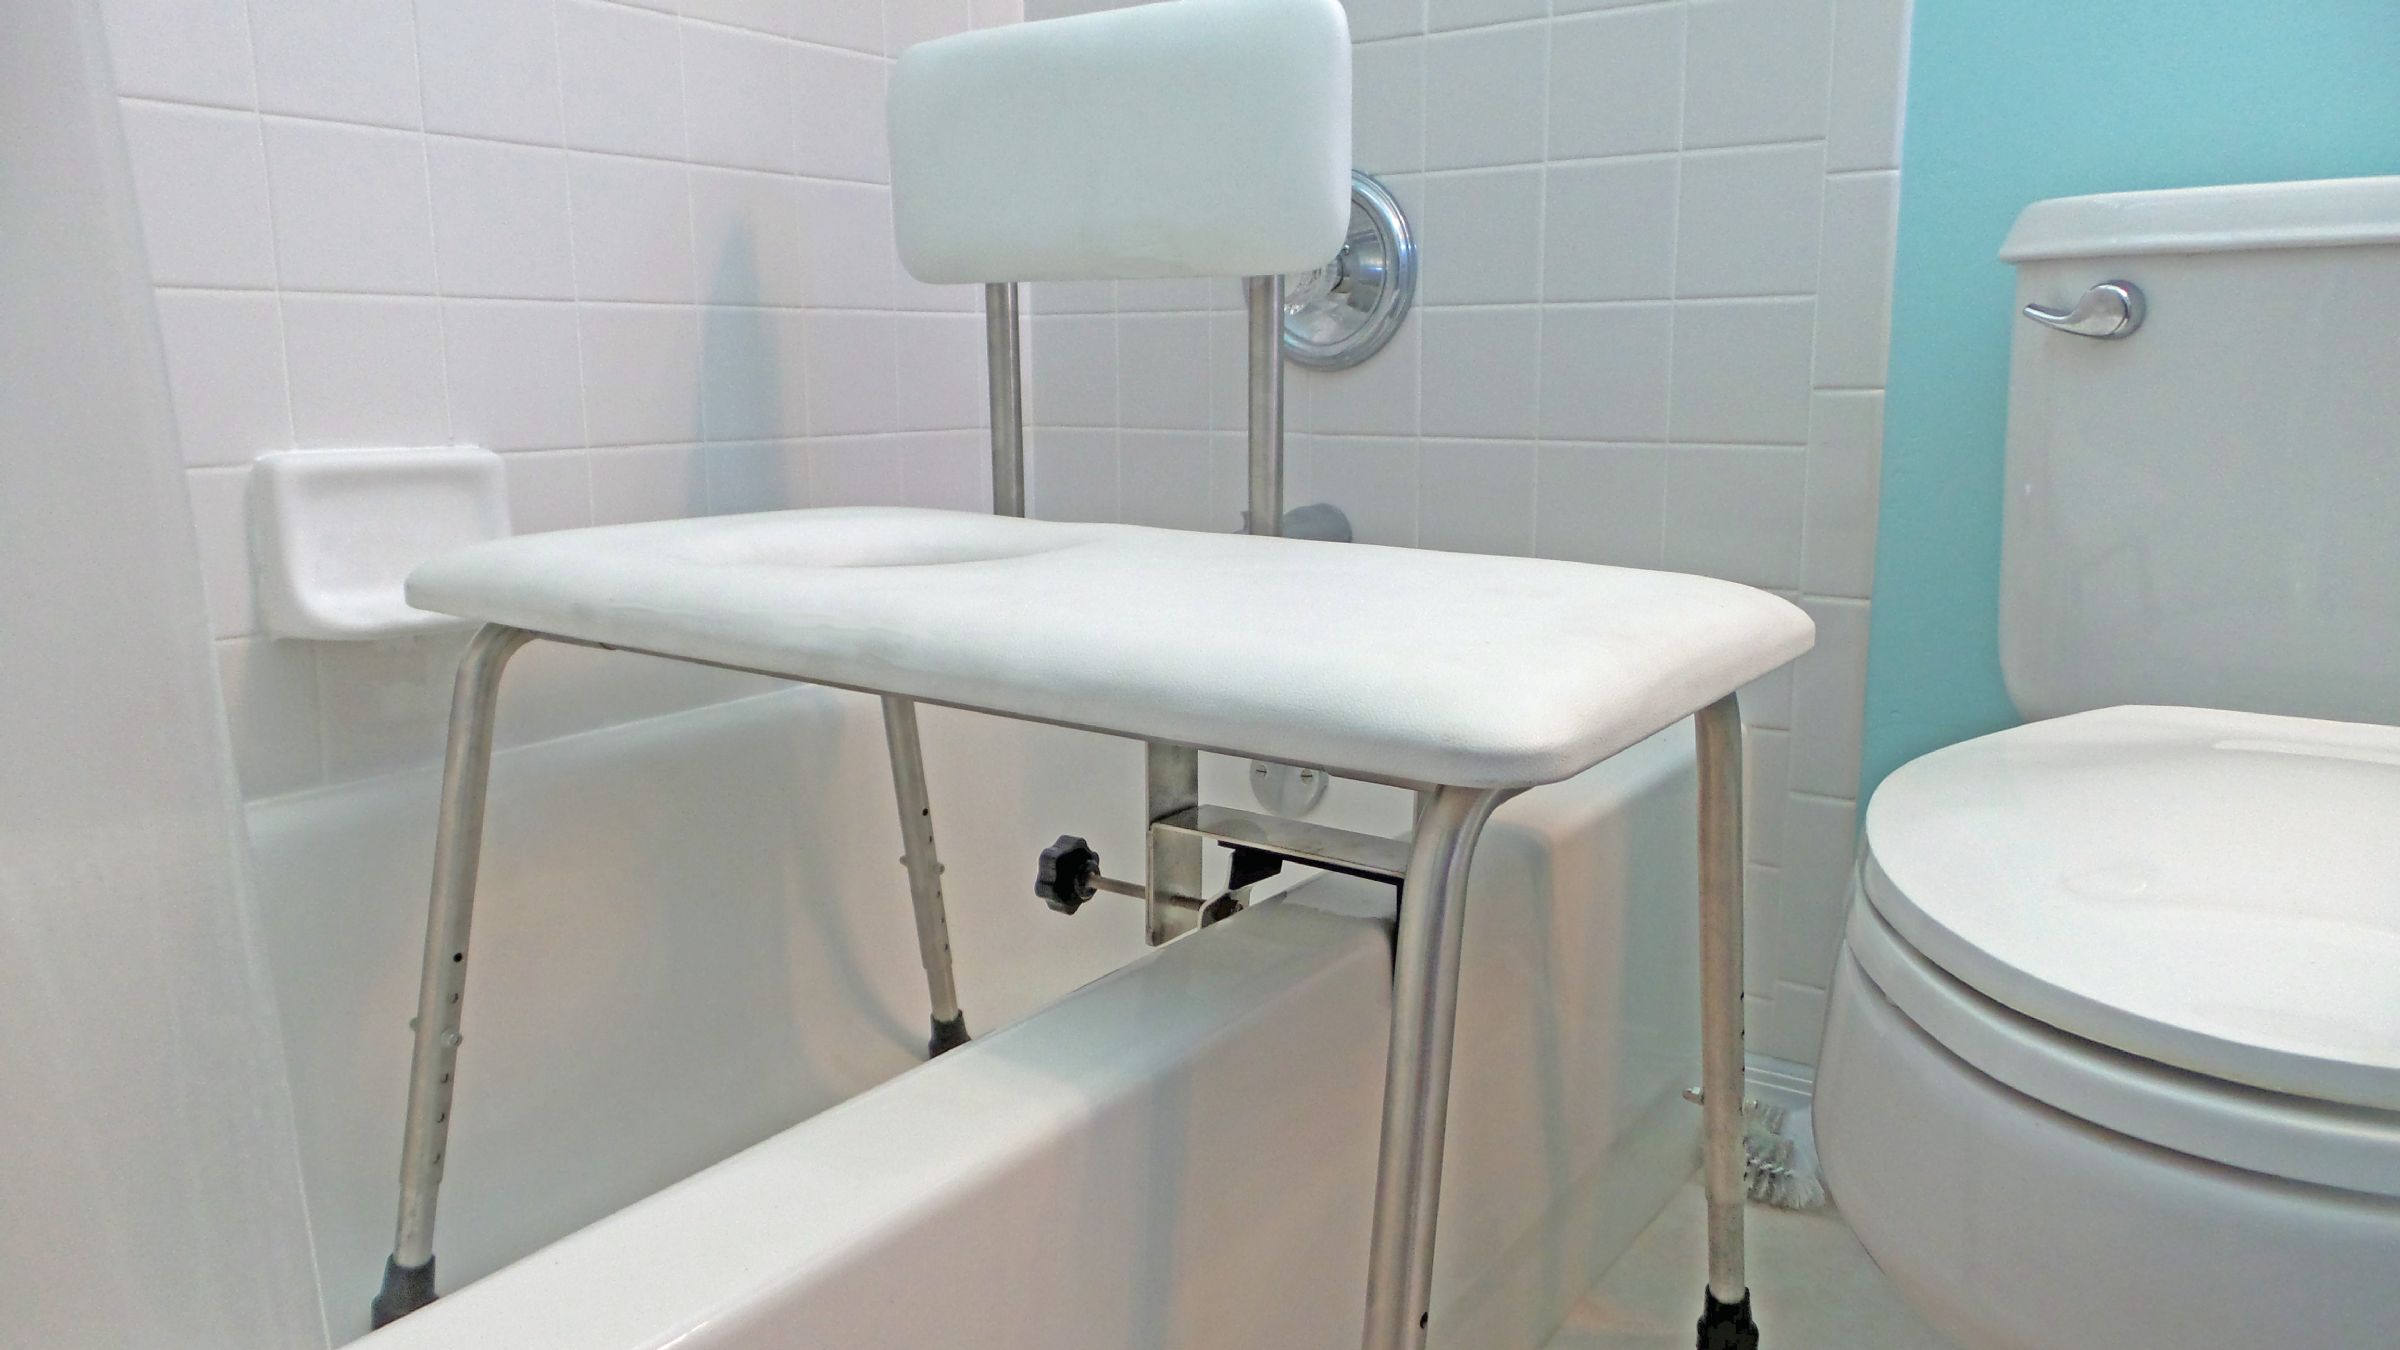 Portable Bathroom Bench with Potty Hole - FREE Shipping